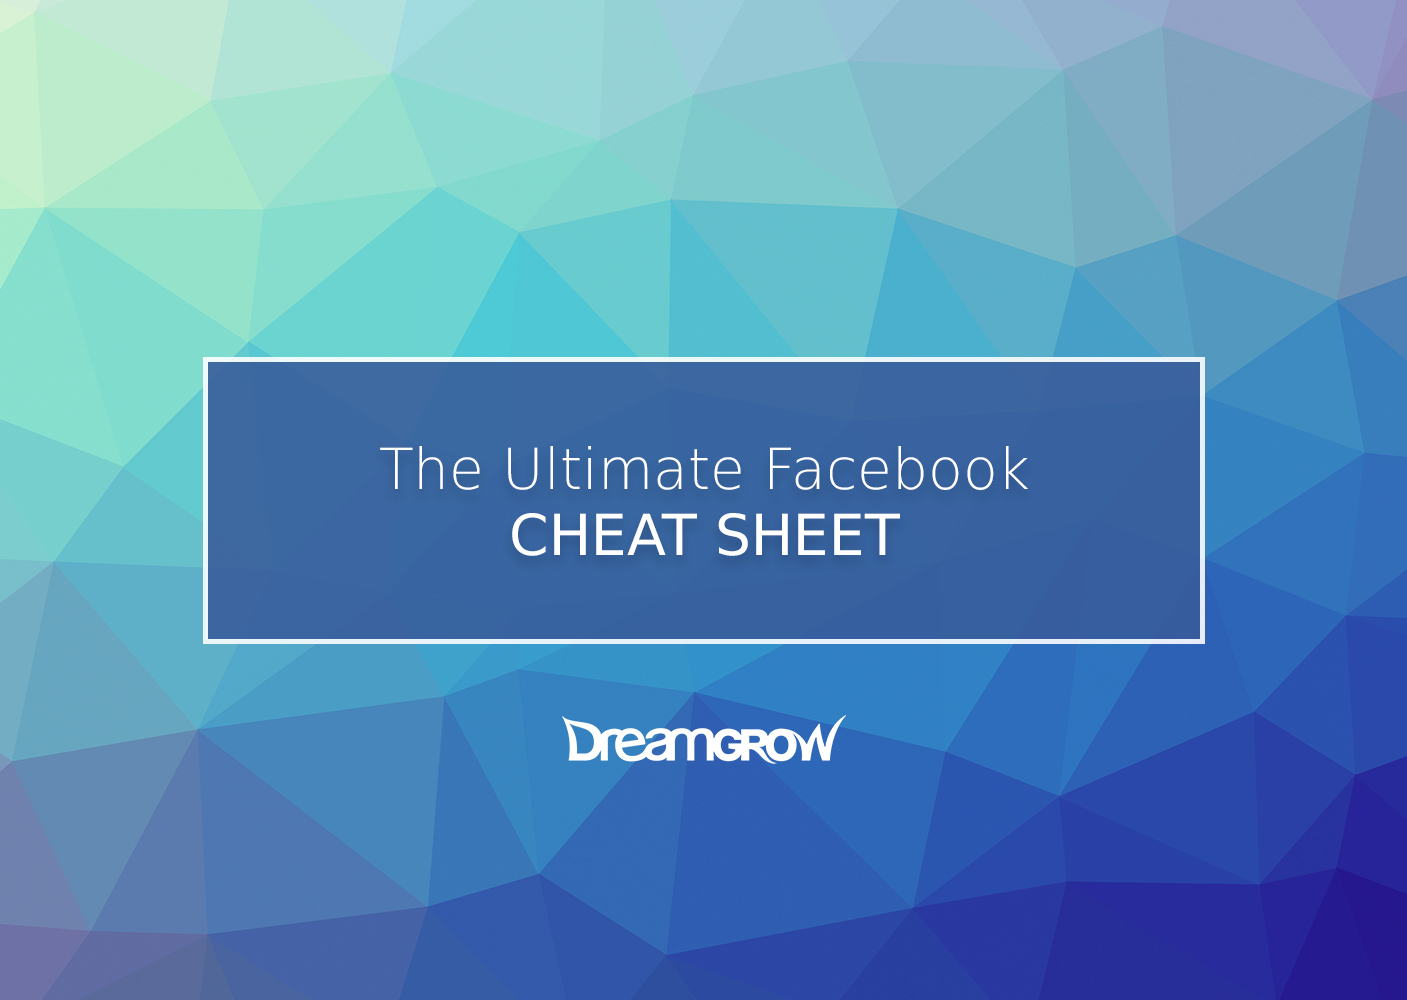 Facebook Cheat Sheet Sizes And Dimensions - Facebook Banner Dimensions 2018 - HD Wallpaper 